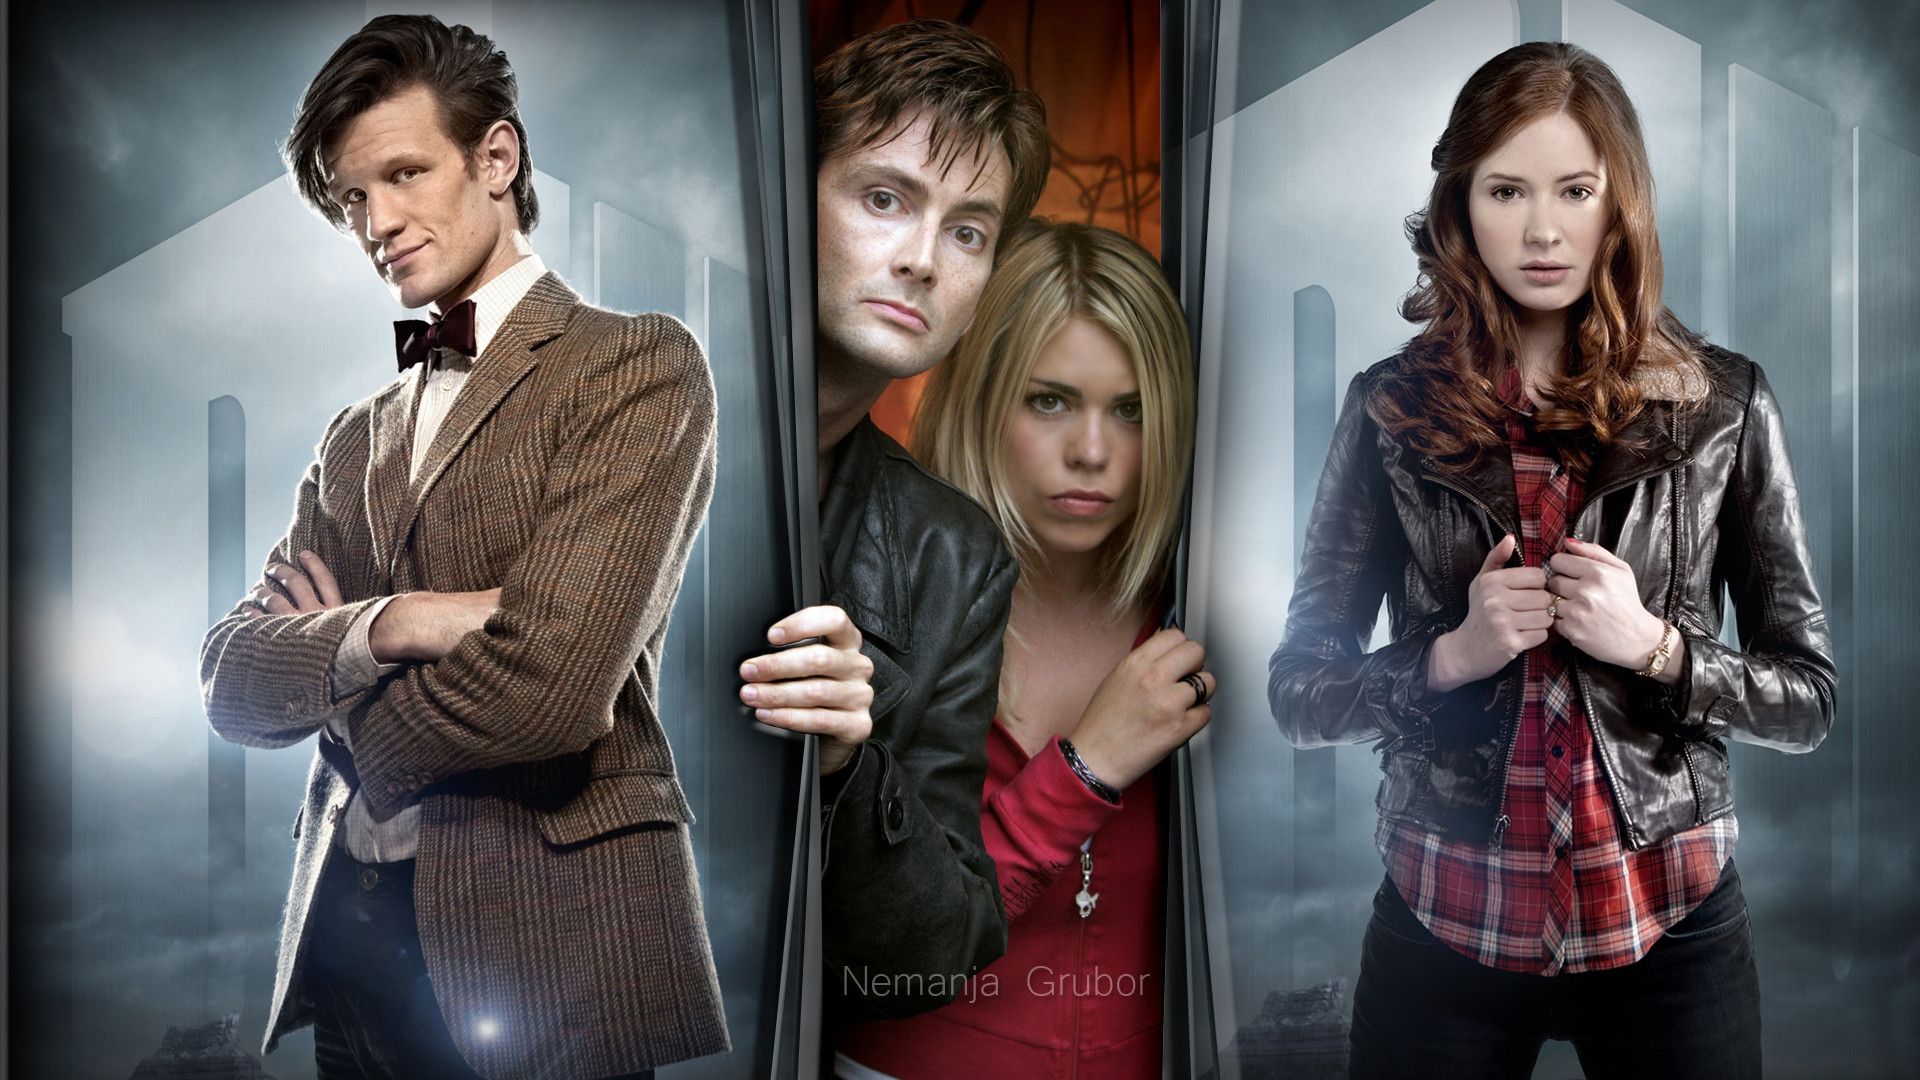 Free Doctor Who Wallpaper download | Wallpapers, Backgrounds ...